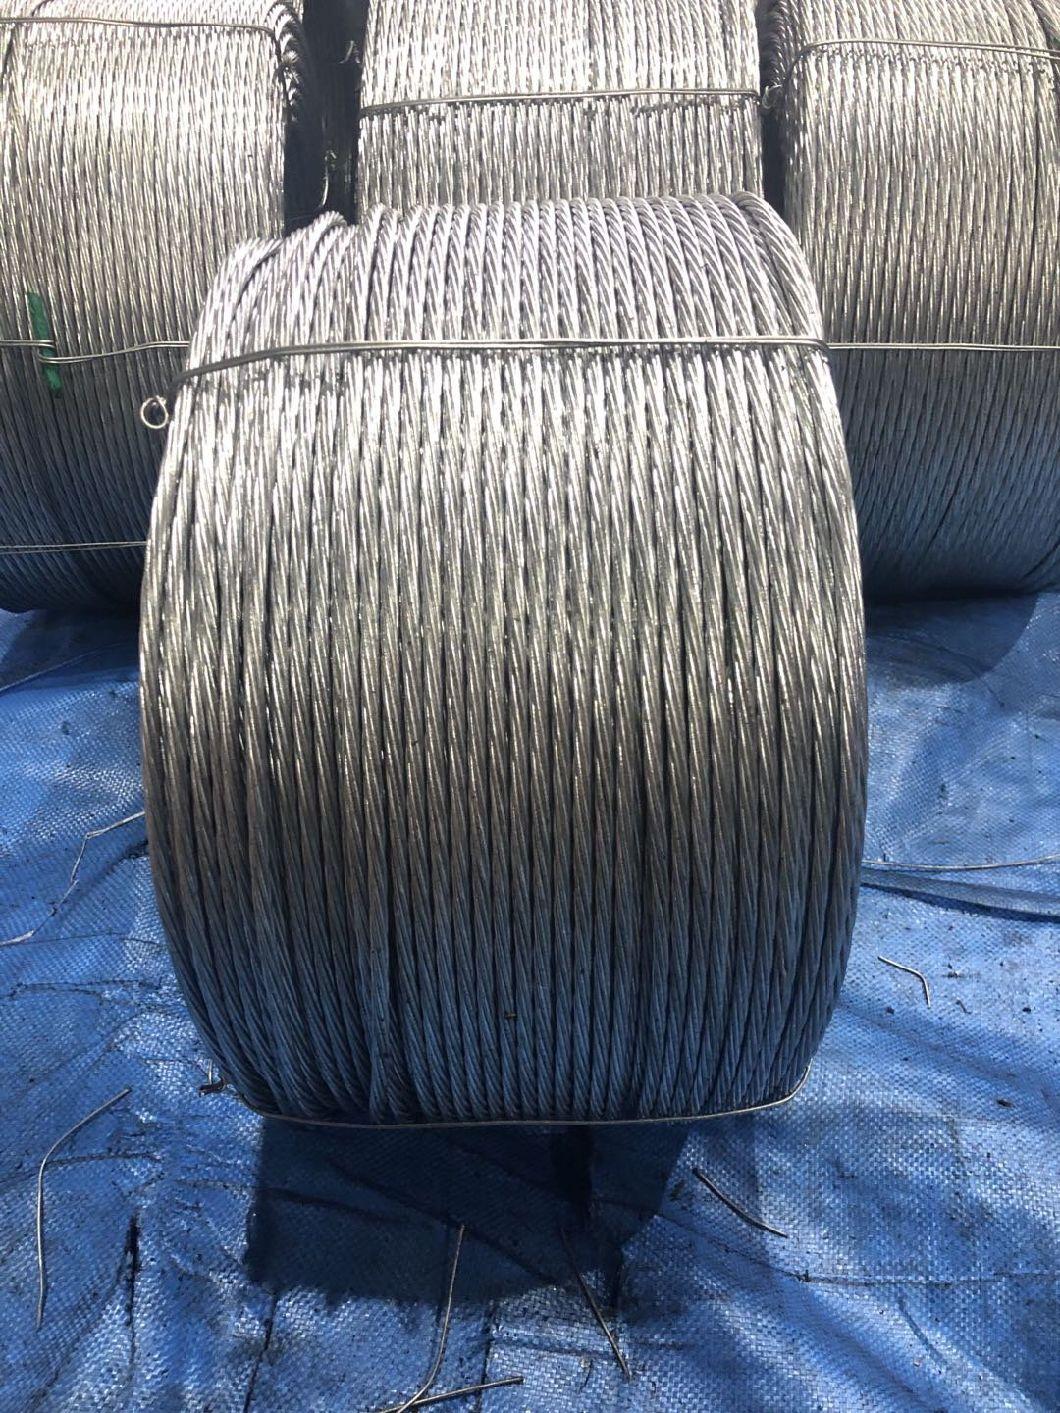 BS 183 Stay Wire Galvanized Steel Wire / Earth Wire